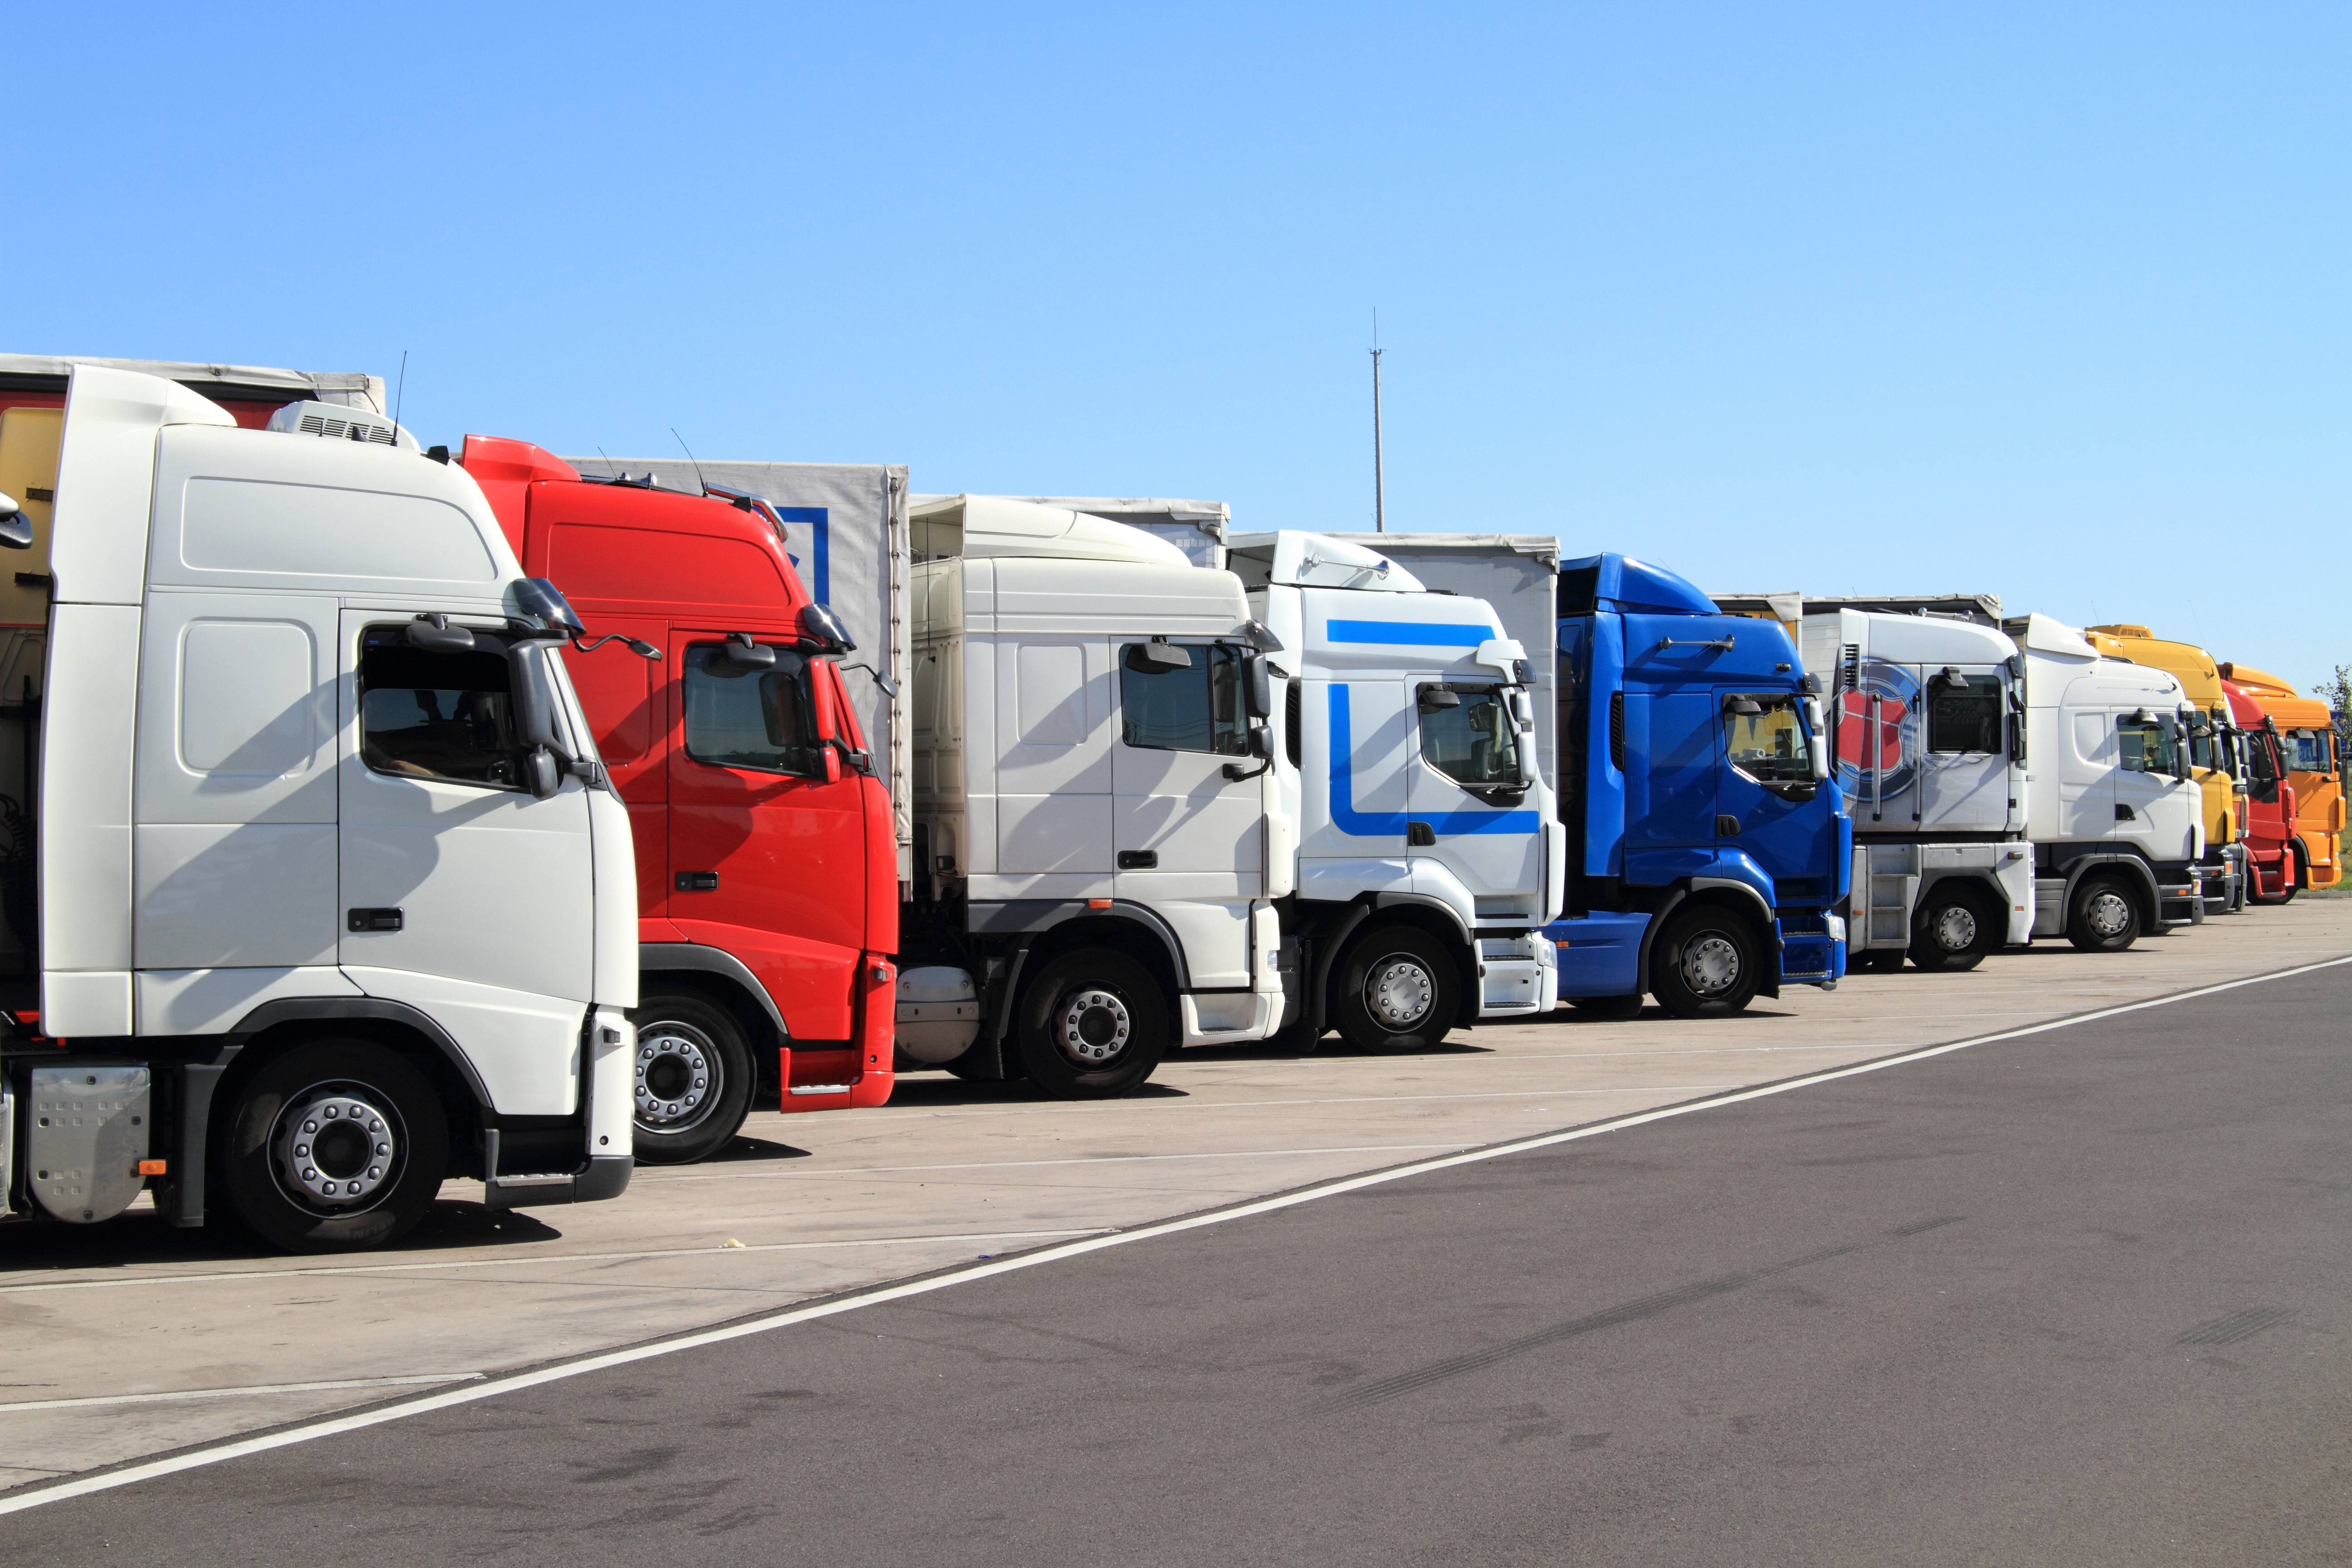 Alexander Friesz claims adverse toll increase for Euro 6 trucks